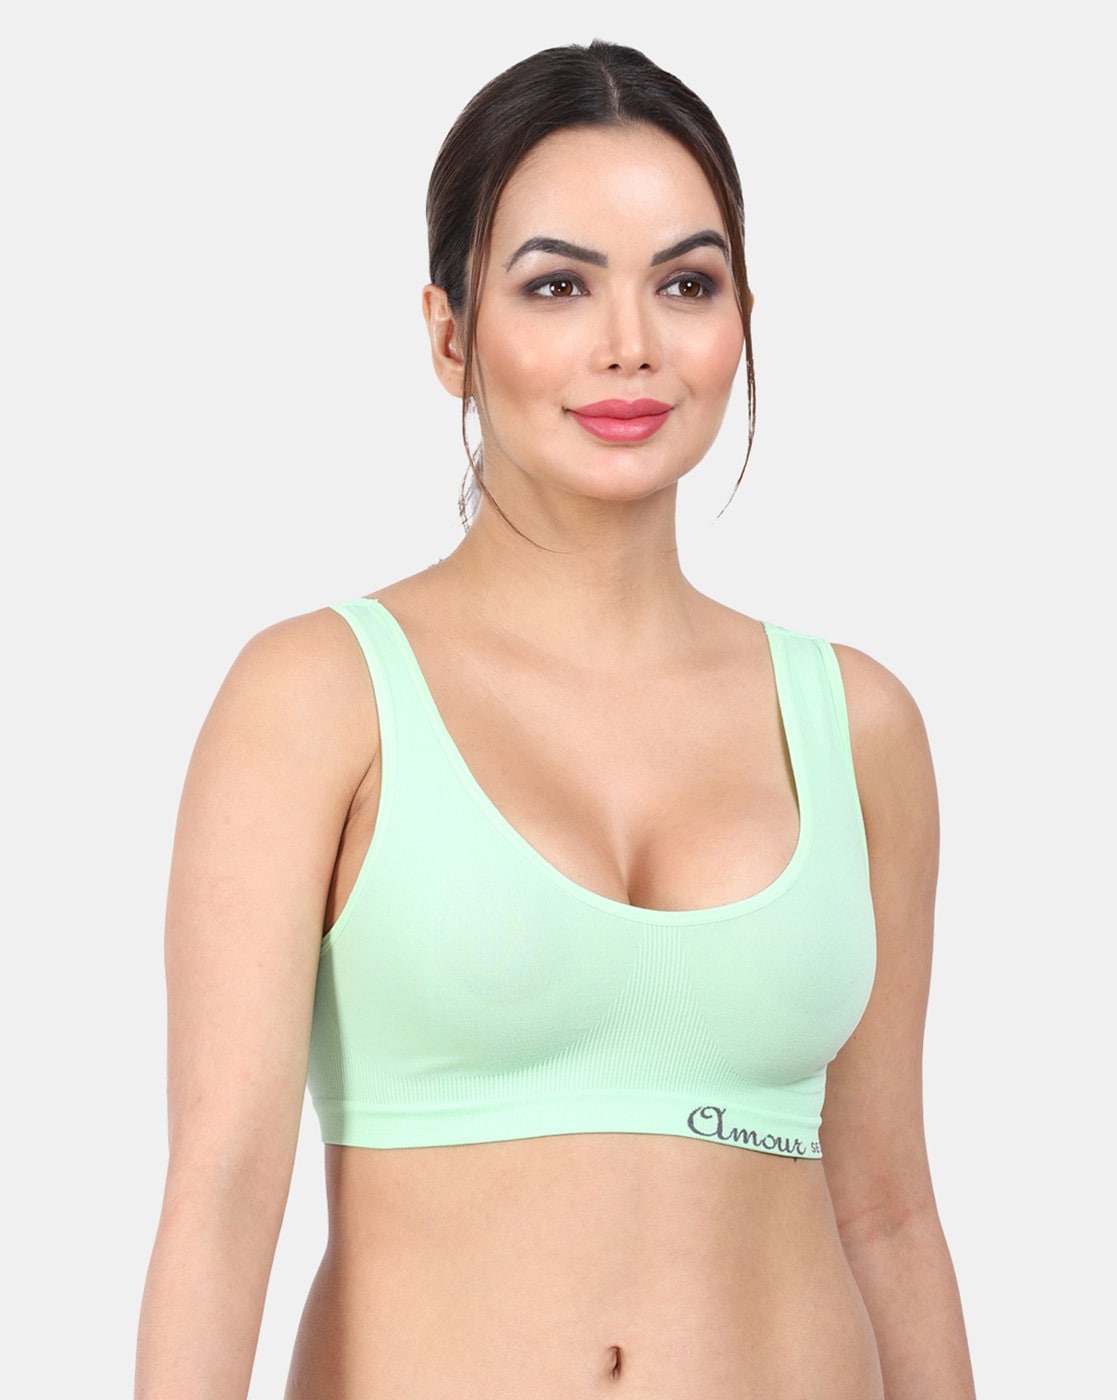 Other Auden Womens Bra Sz 32C The Ace Sage Green Padded Racerback